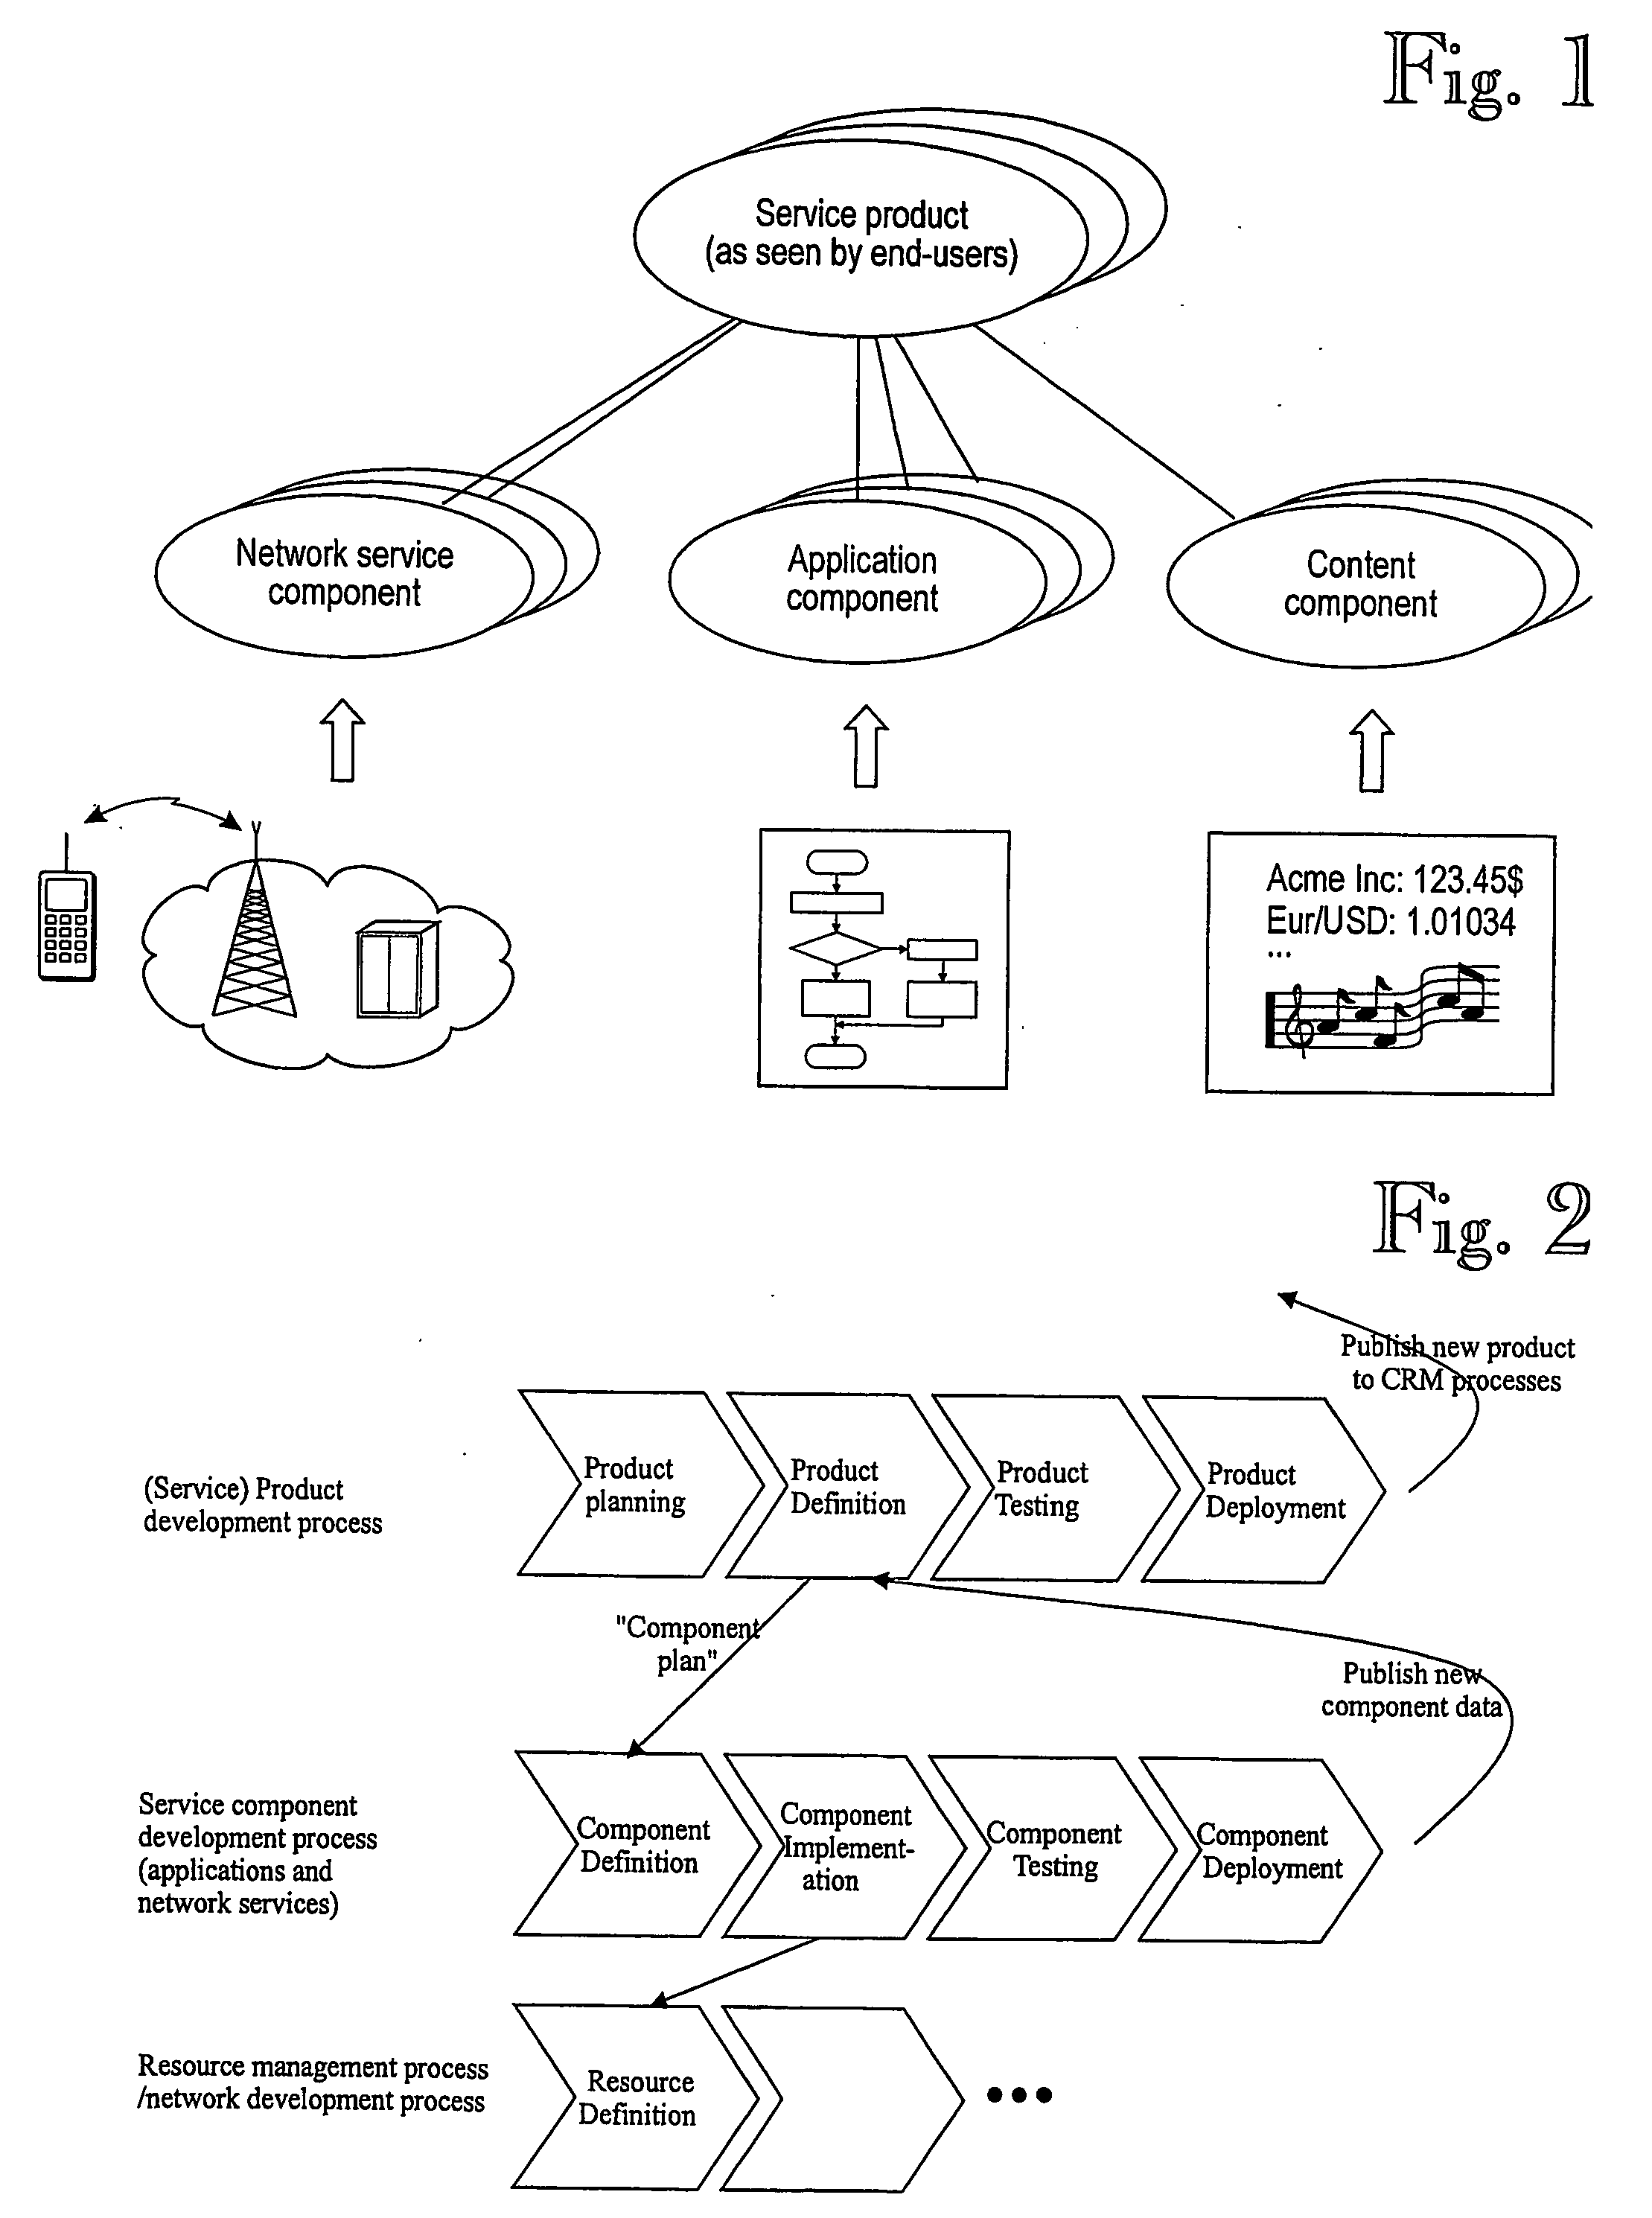 Management of service products in a network